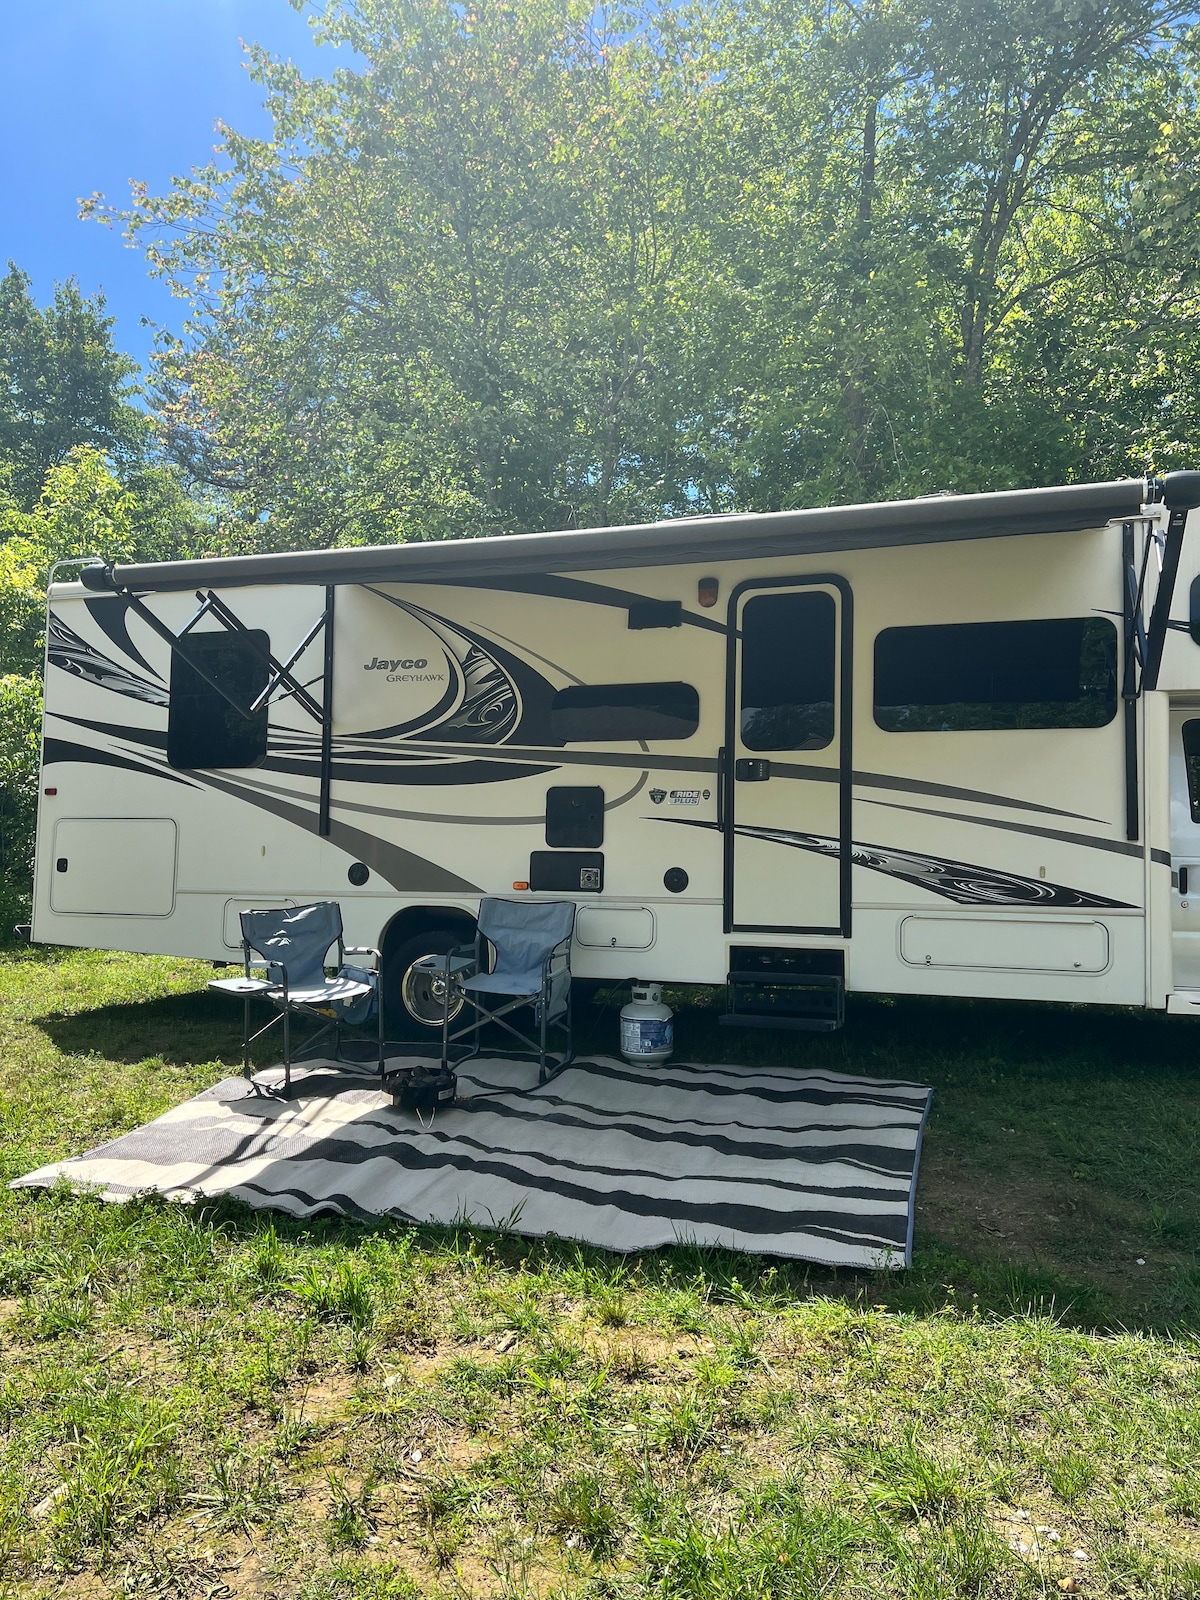 Relaxing RV on the Tennessee Plateau!